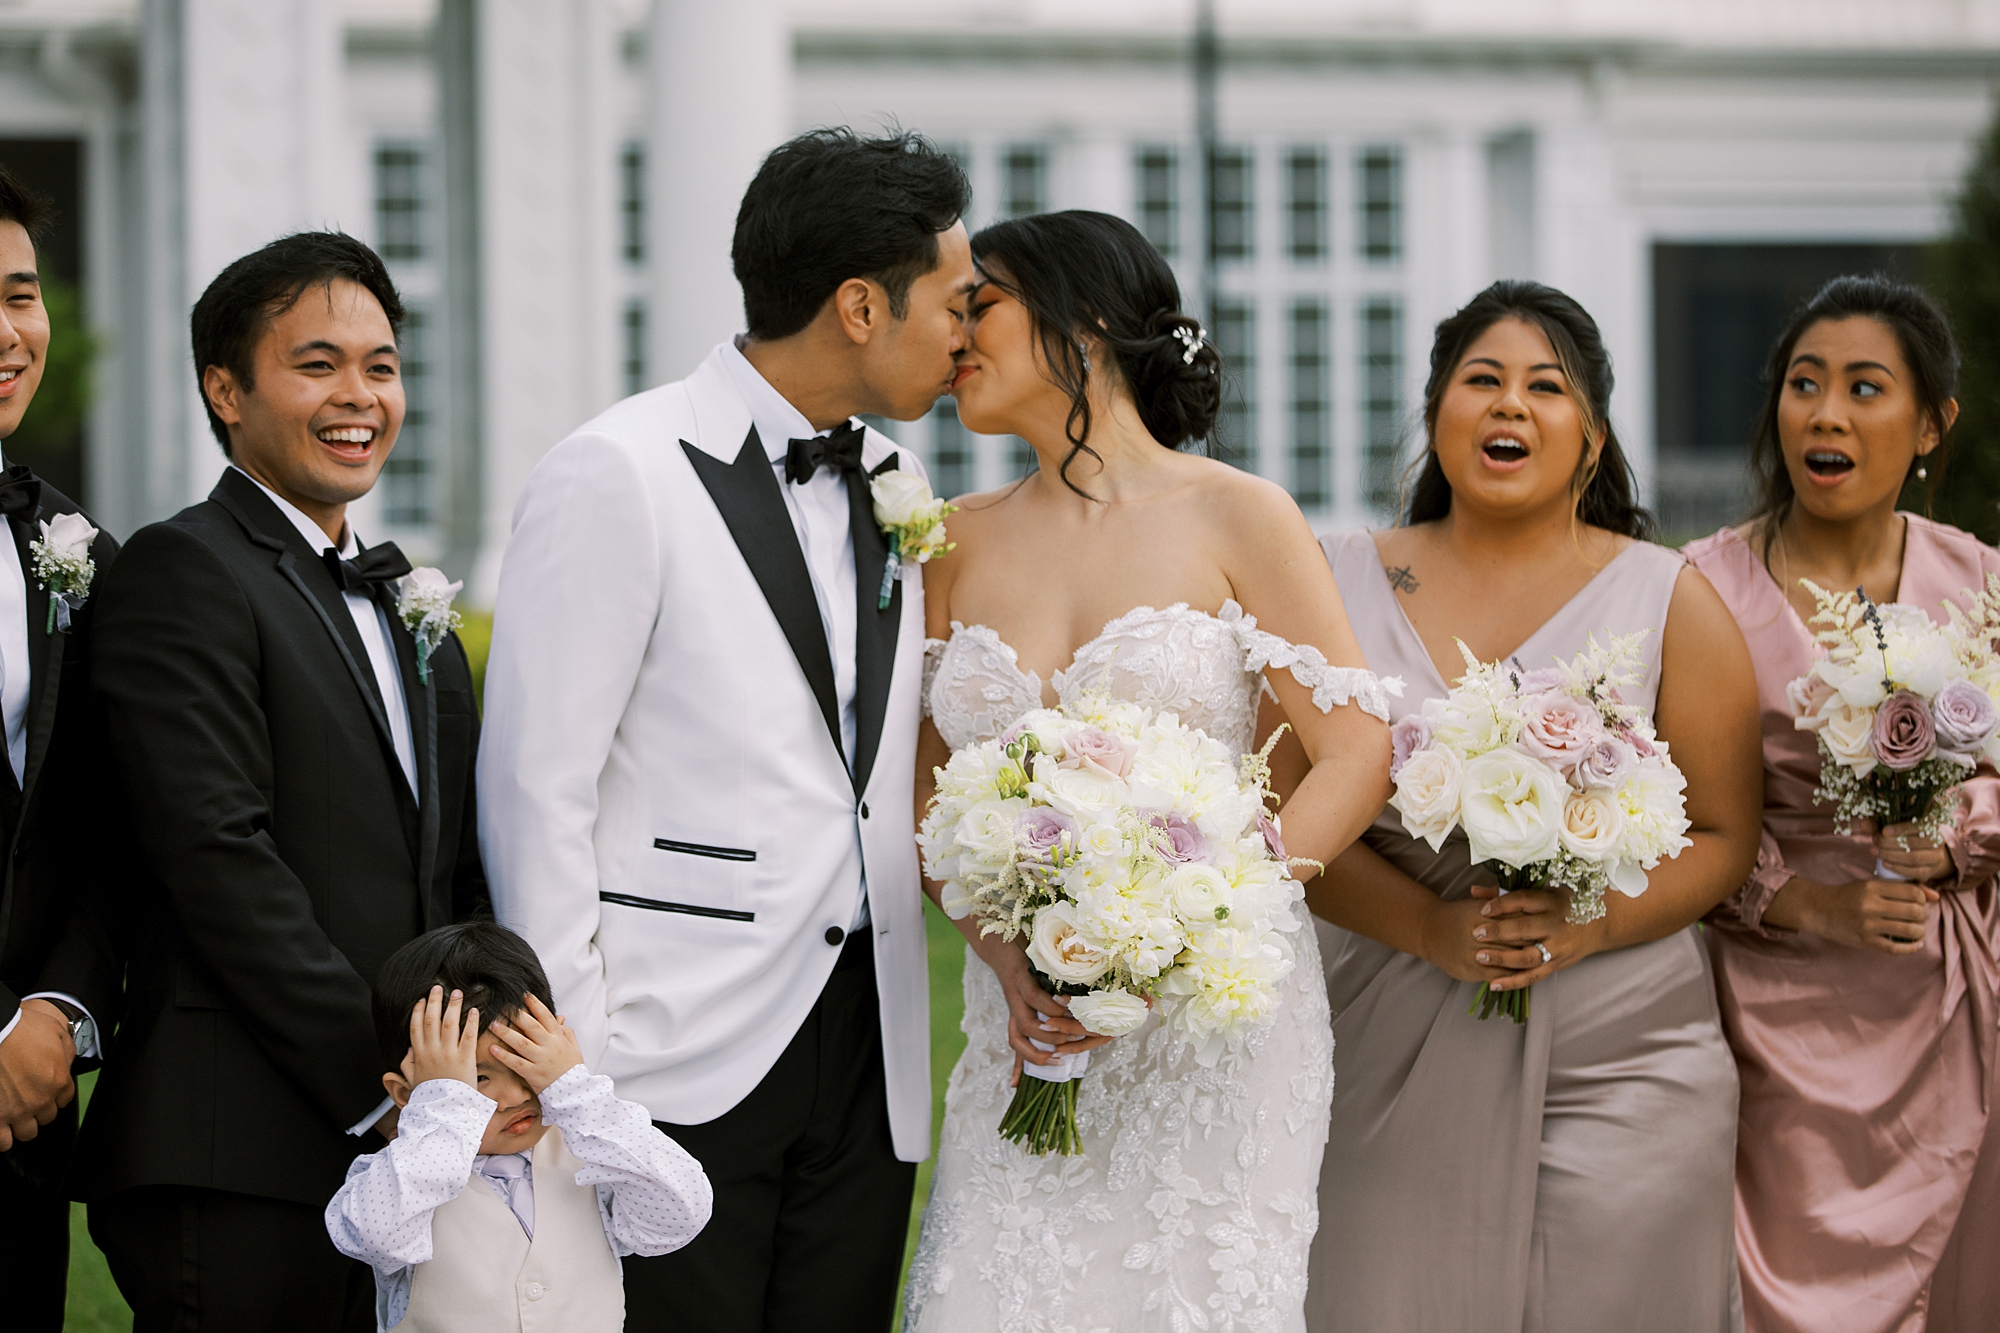 newlyweds kiss while wedding party cheers around them